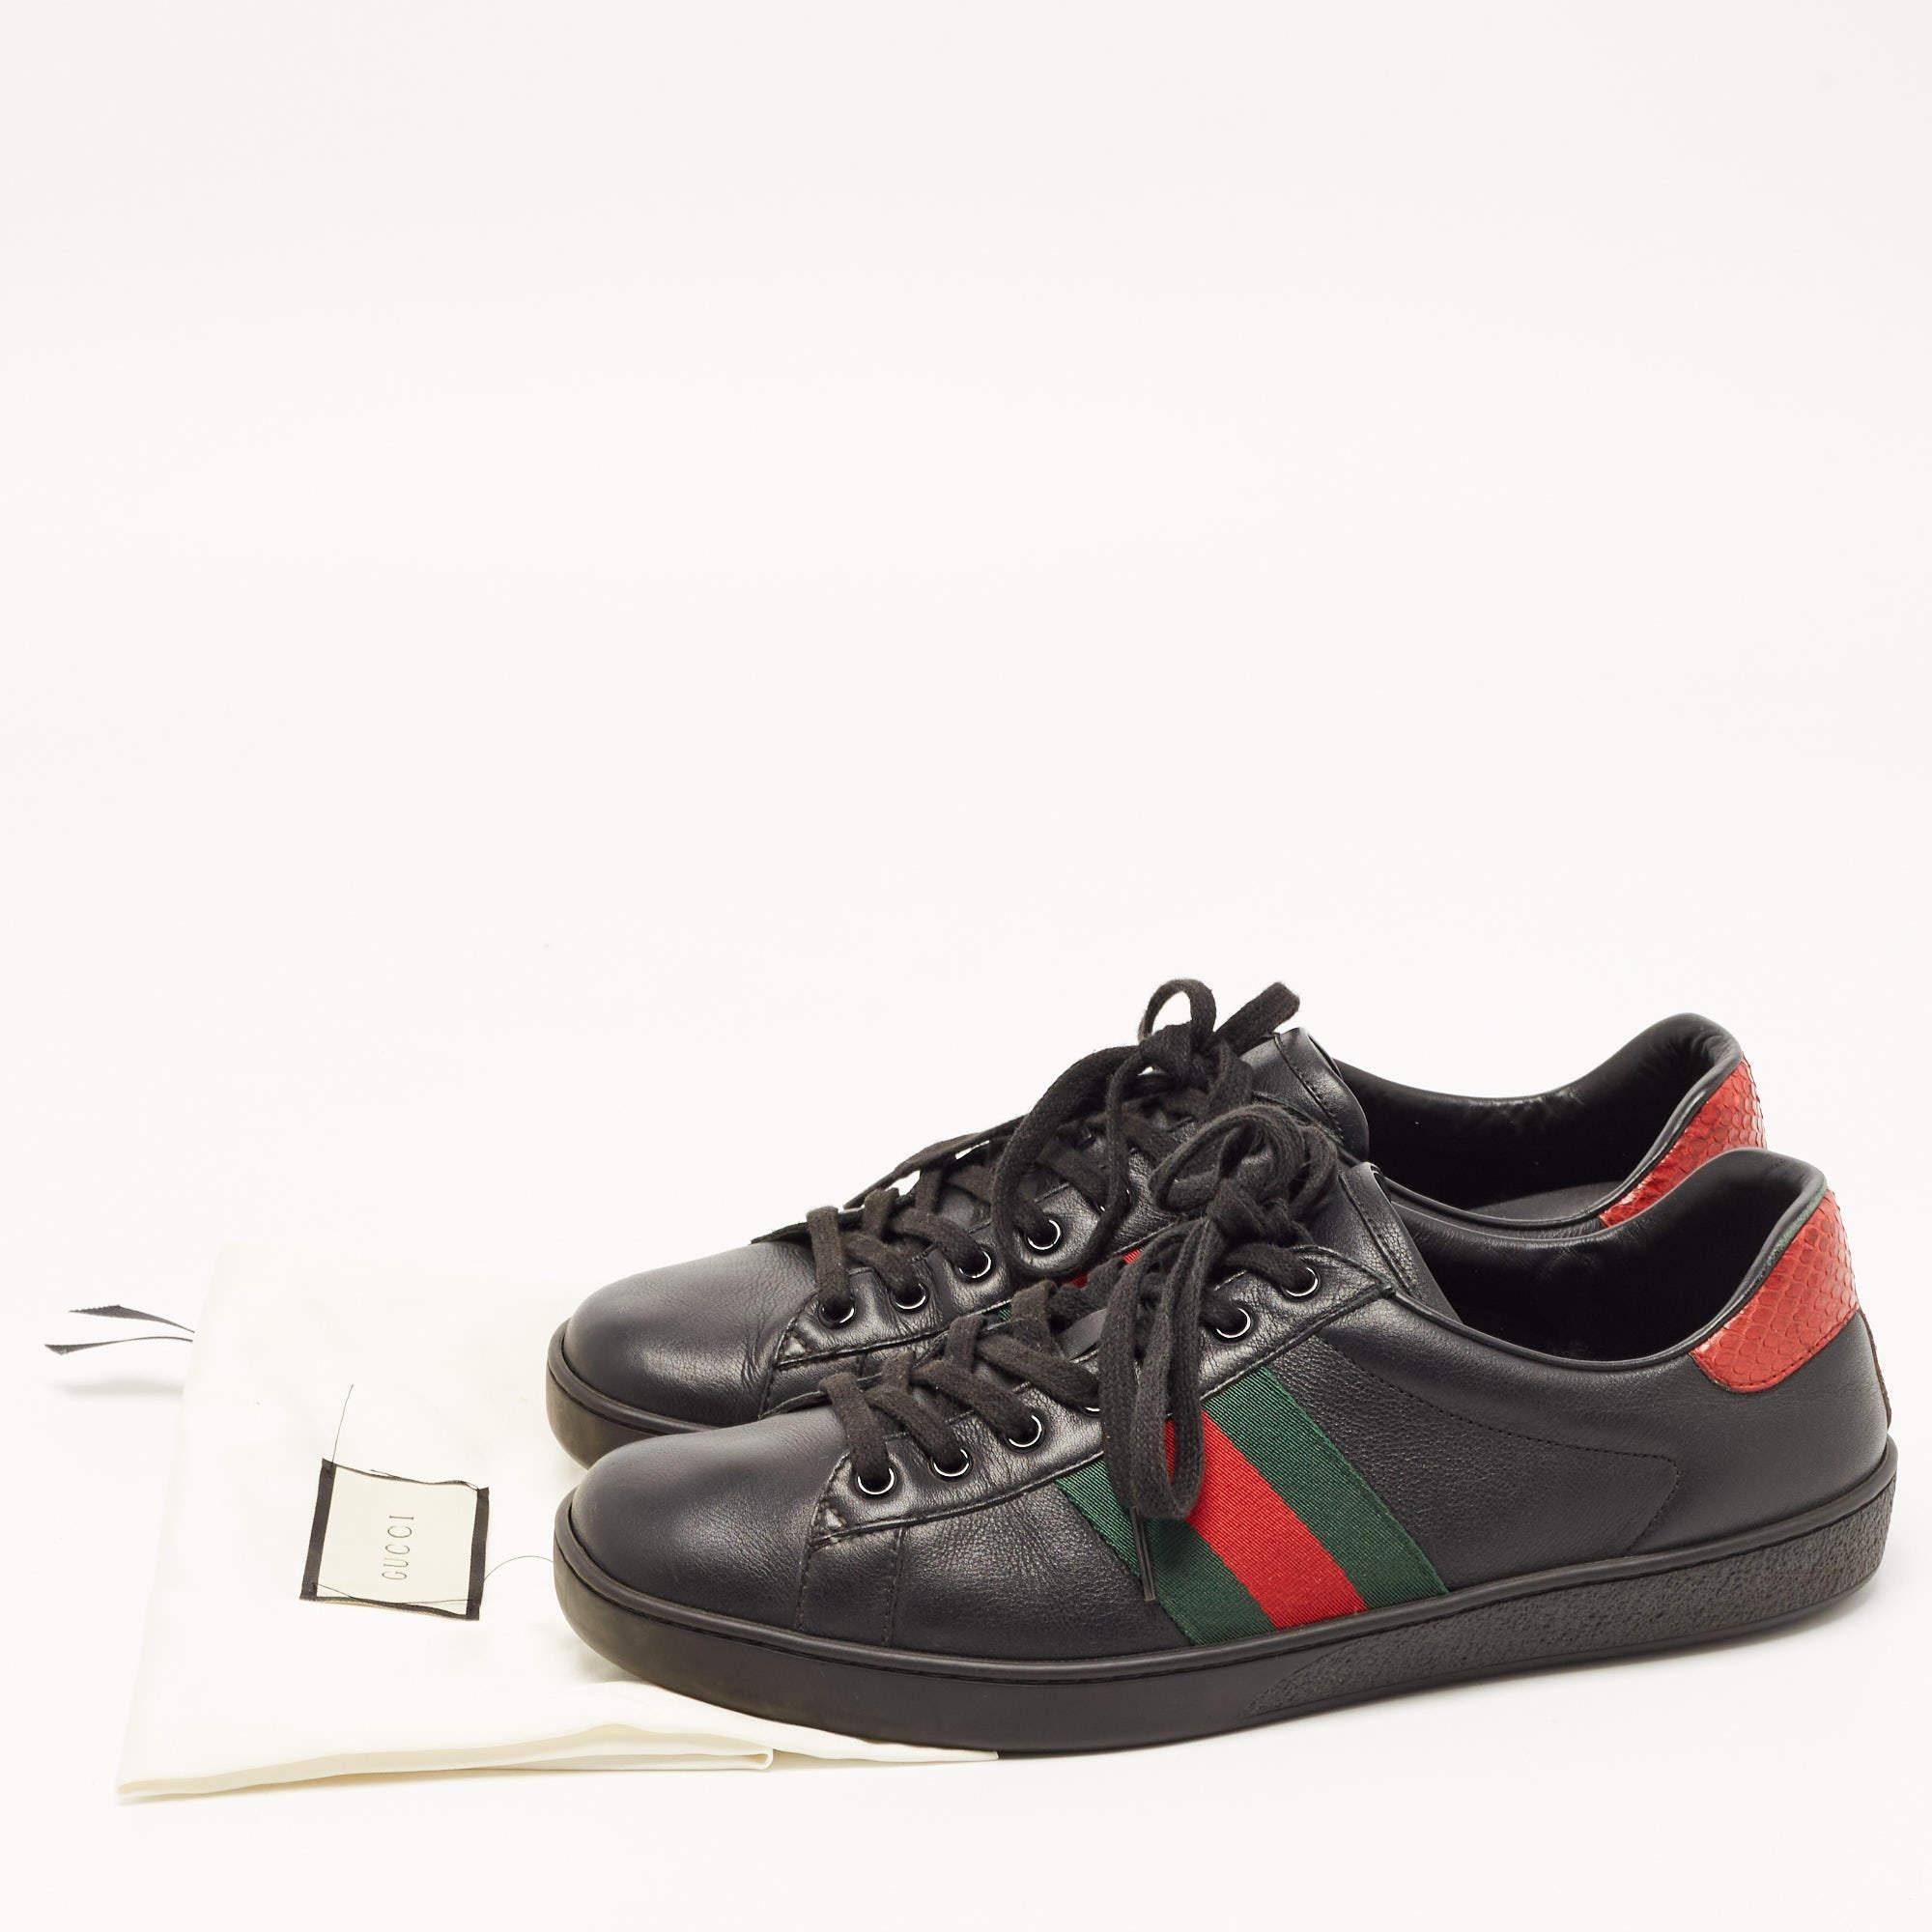 Gucci Black Leather Ace Web Low Top Sneakers Size 42 4